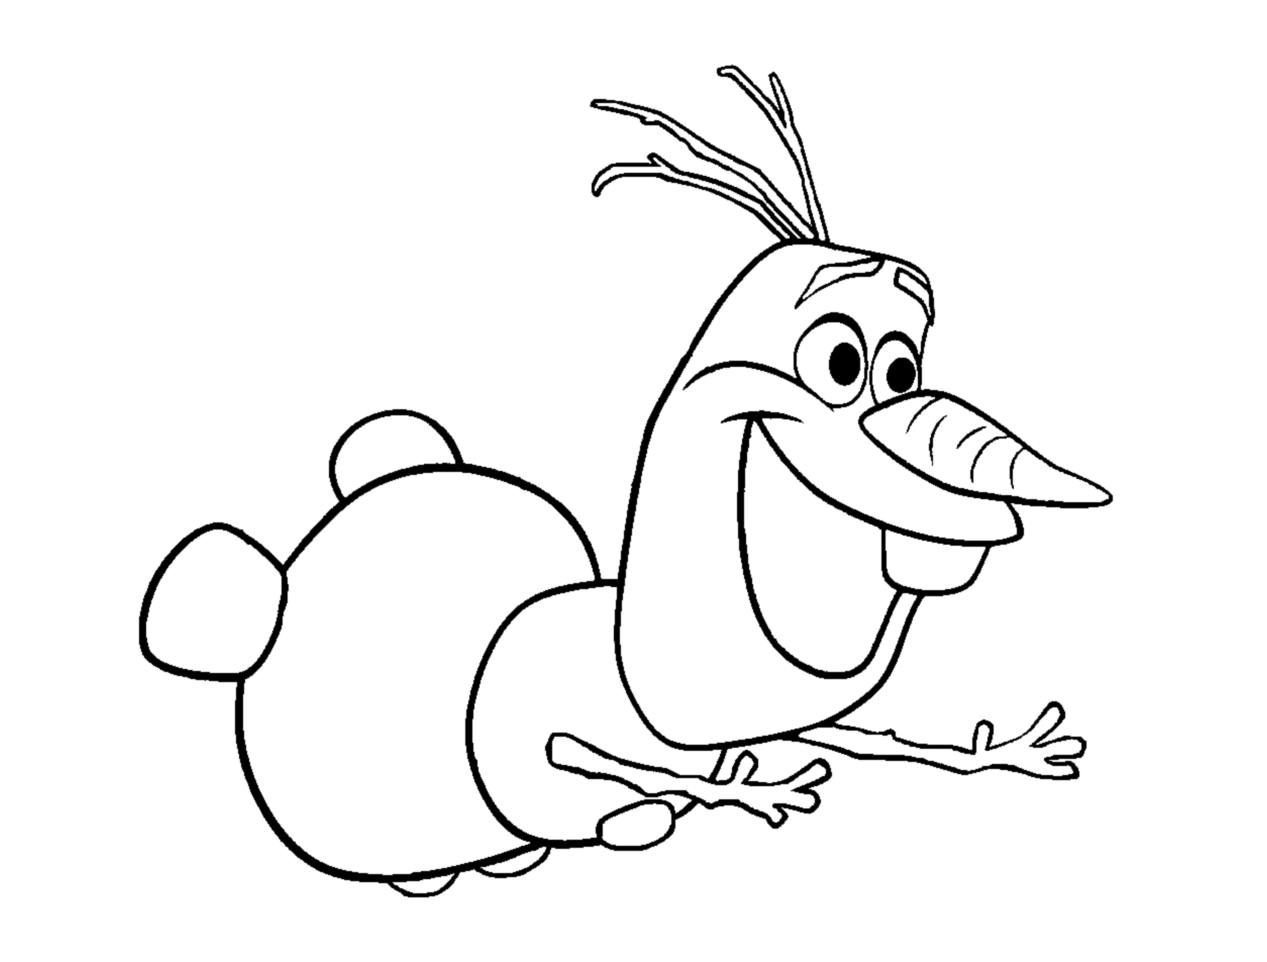 Free Frozen coloring page to print and color : Olaf flying !